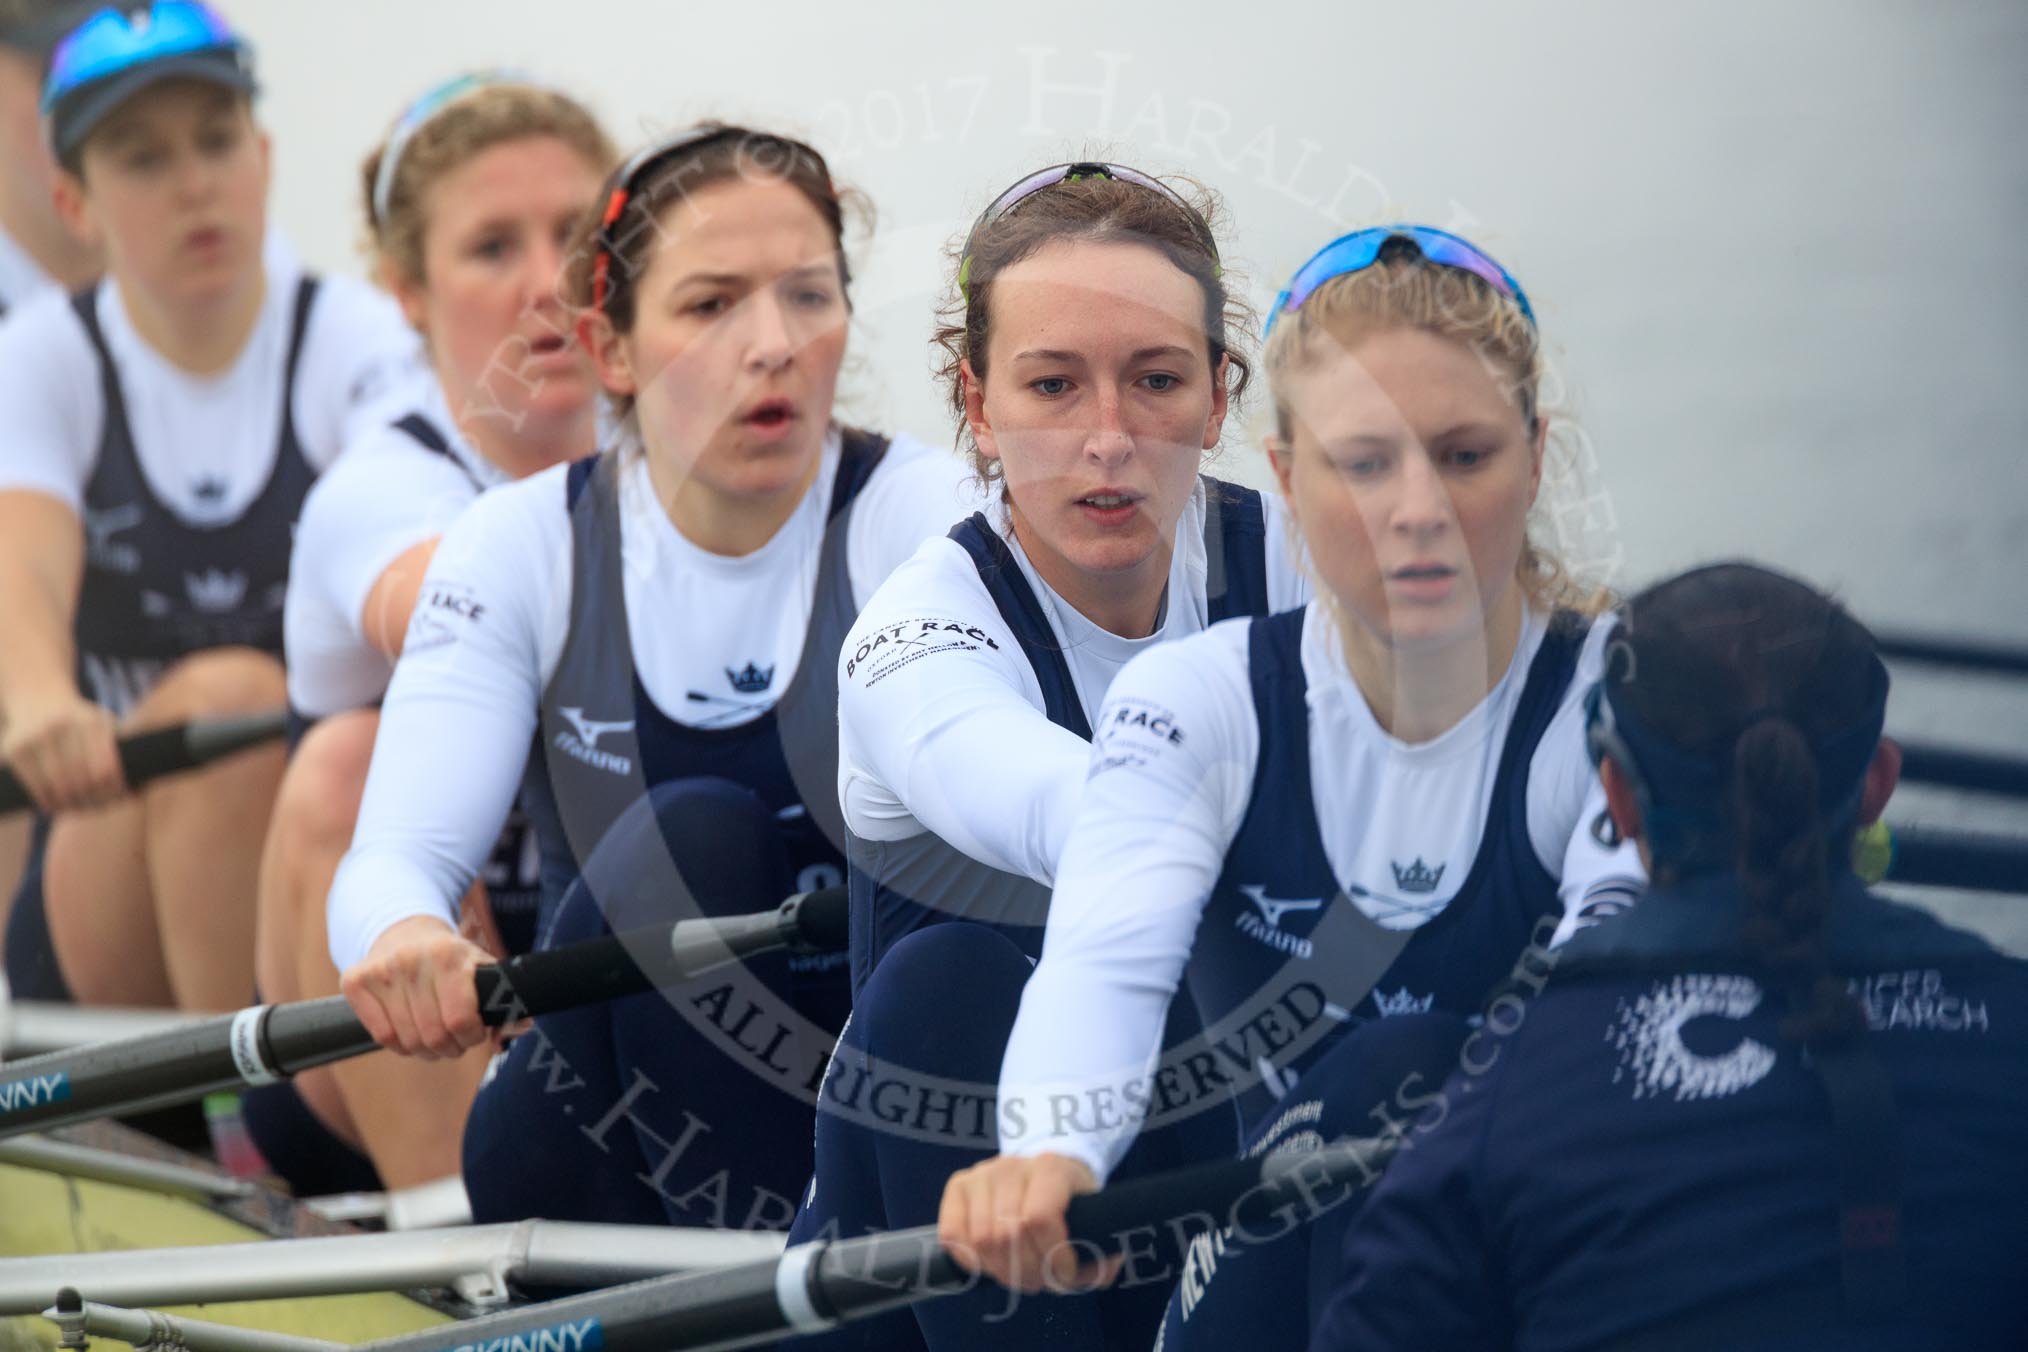 The Women's Boat Race season 2018 - fixture OUWBC vs. Molesey BC: OUWBC just after the start of the race: 4 Alice Roberts, 5 Morgan McGovern, 6 Sara Kushma, 7 Abigail Killen, stroke Beth Bridgman, cox Jessica Buck.
River Thames between Putney Bridge and Mortlake,
London SW15,

United Kingdom,
on 04 March 2018 at 13:45, image #52